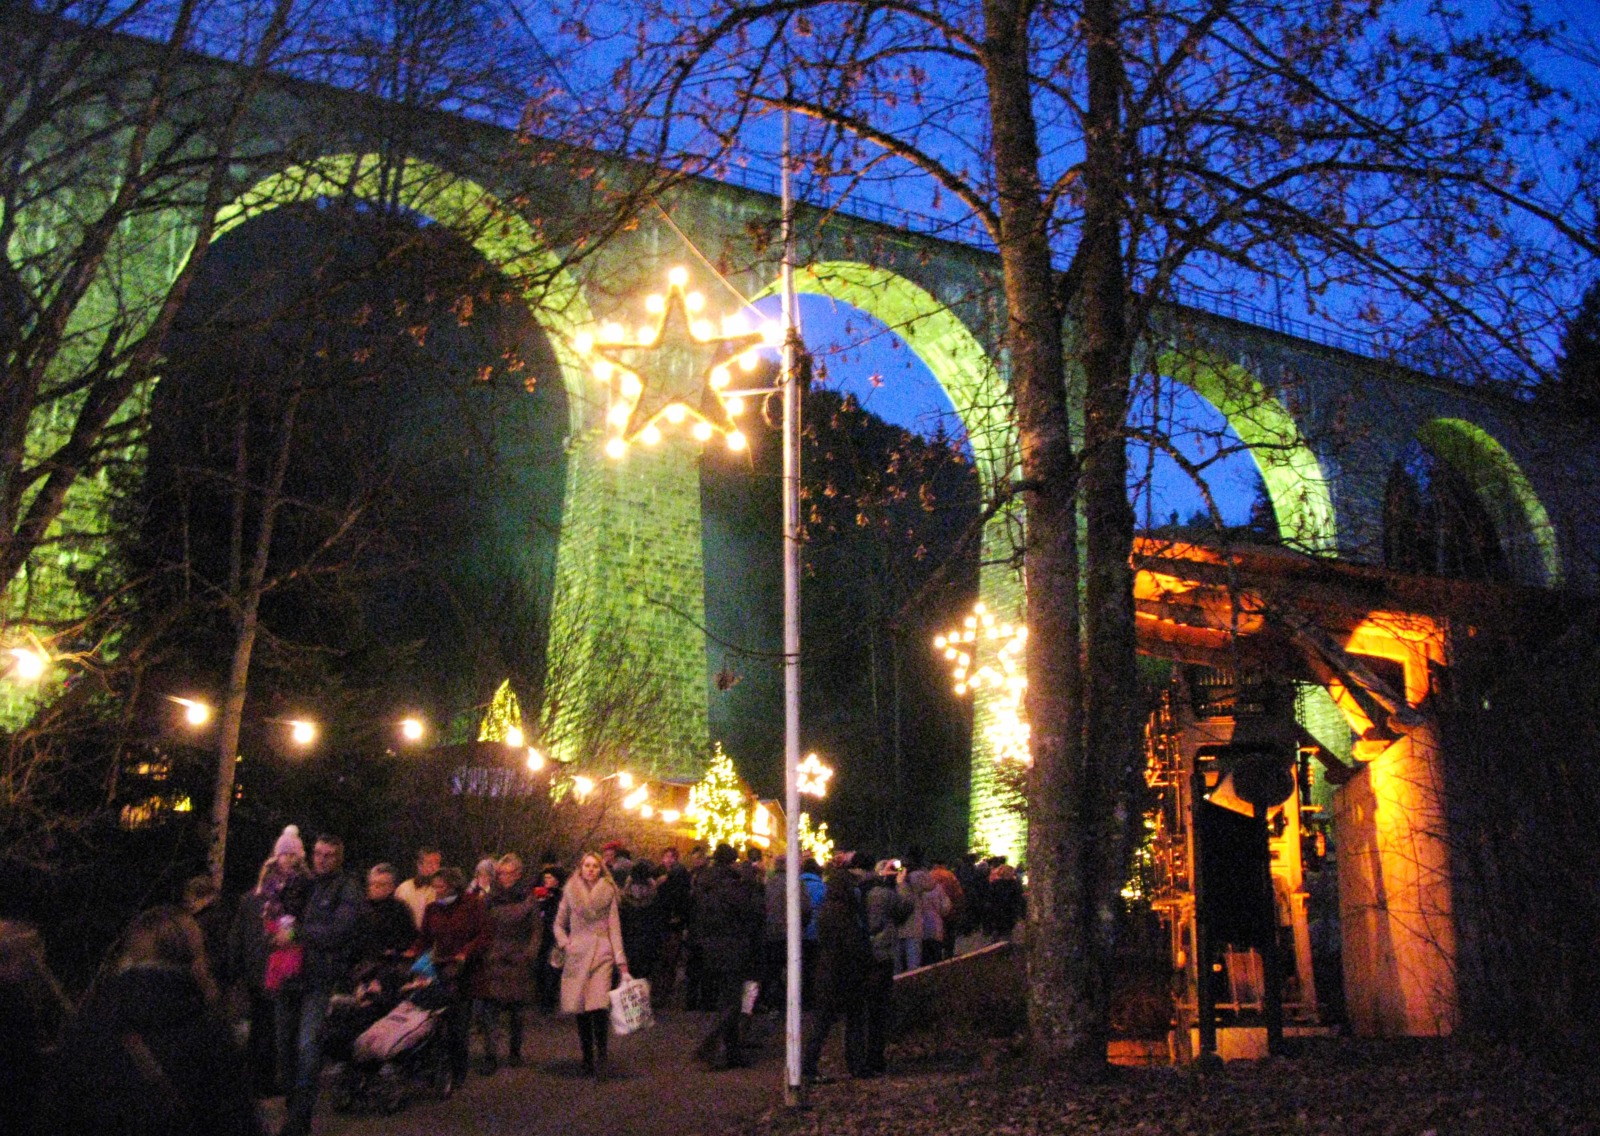 Christmas Markets in Germany - Ravennaschlucht © Andreas Schwarzkopf - licence [CC BY-SA 3.0] from Wikimedia Commons